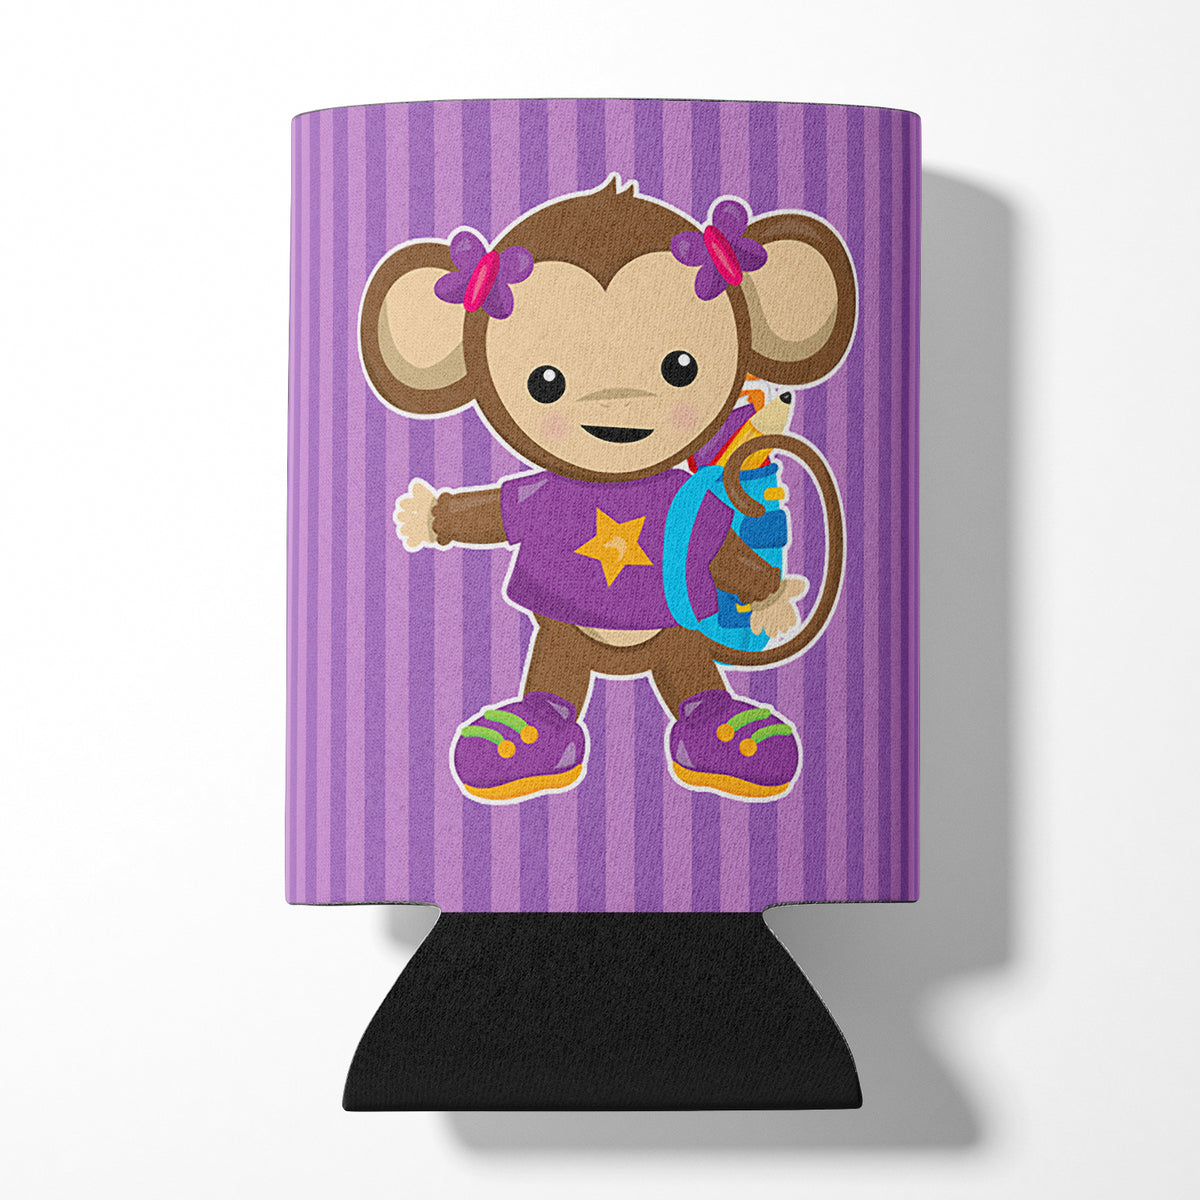 Monkey with Backpack Can or Bottle Hugger BB7017CC